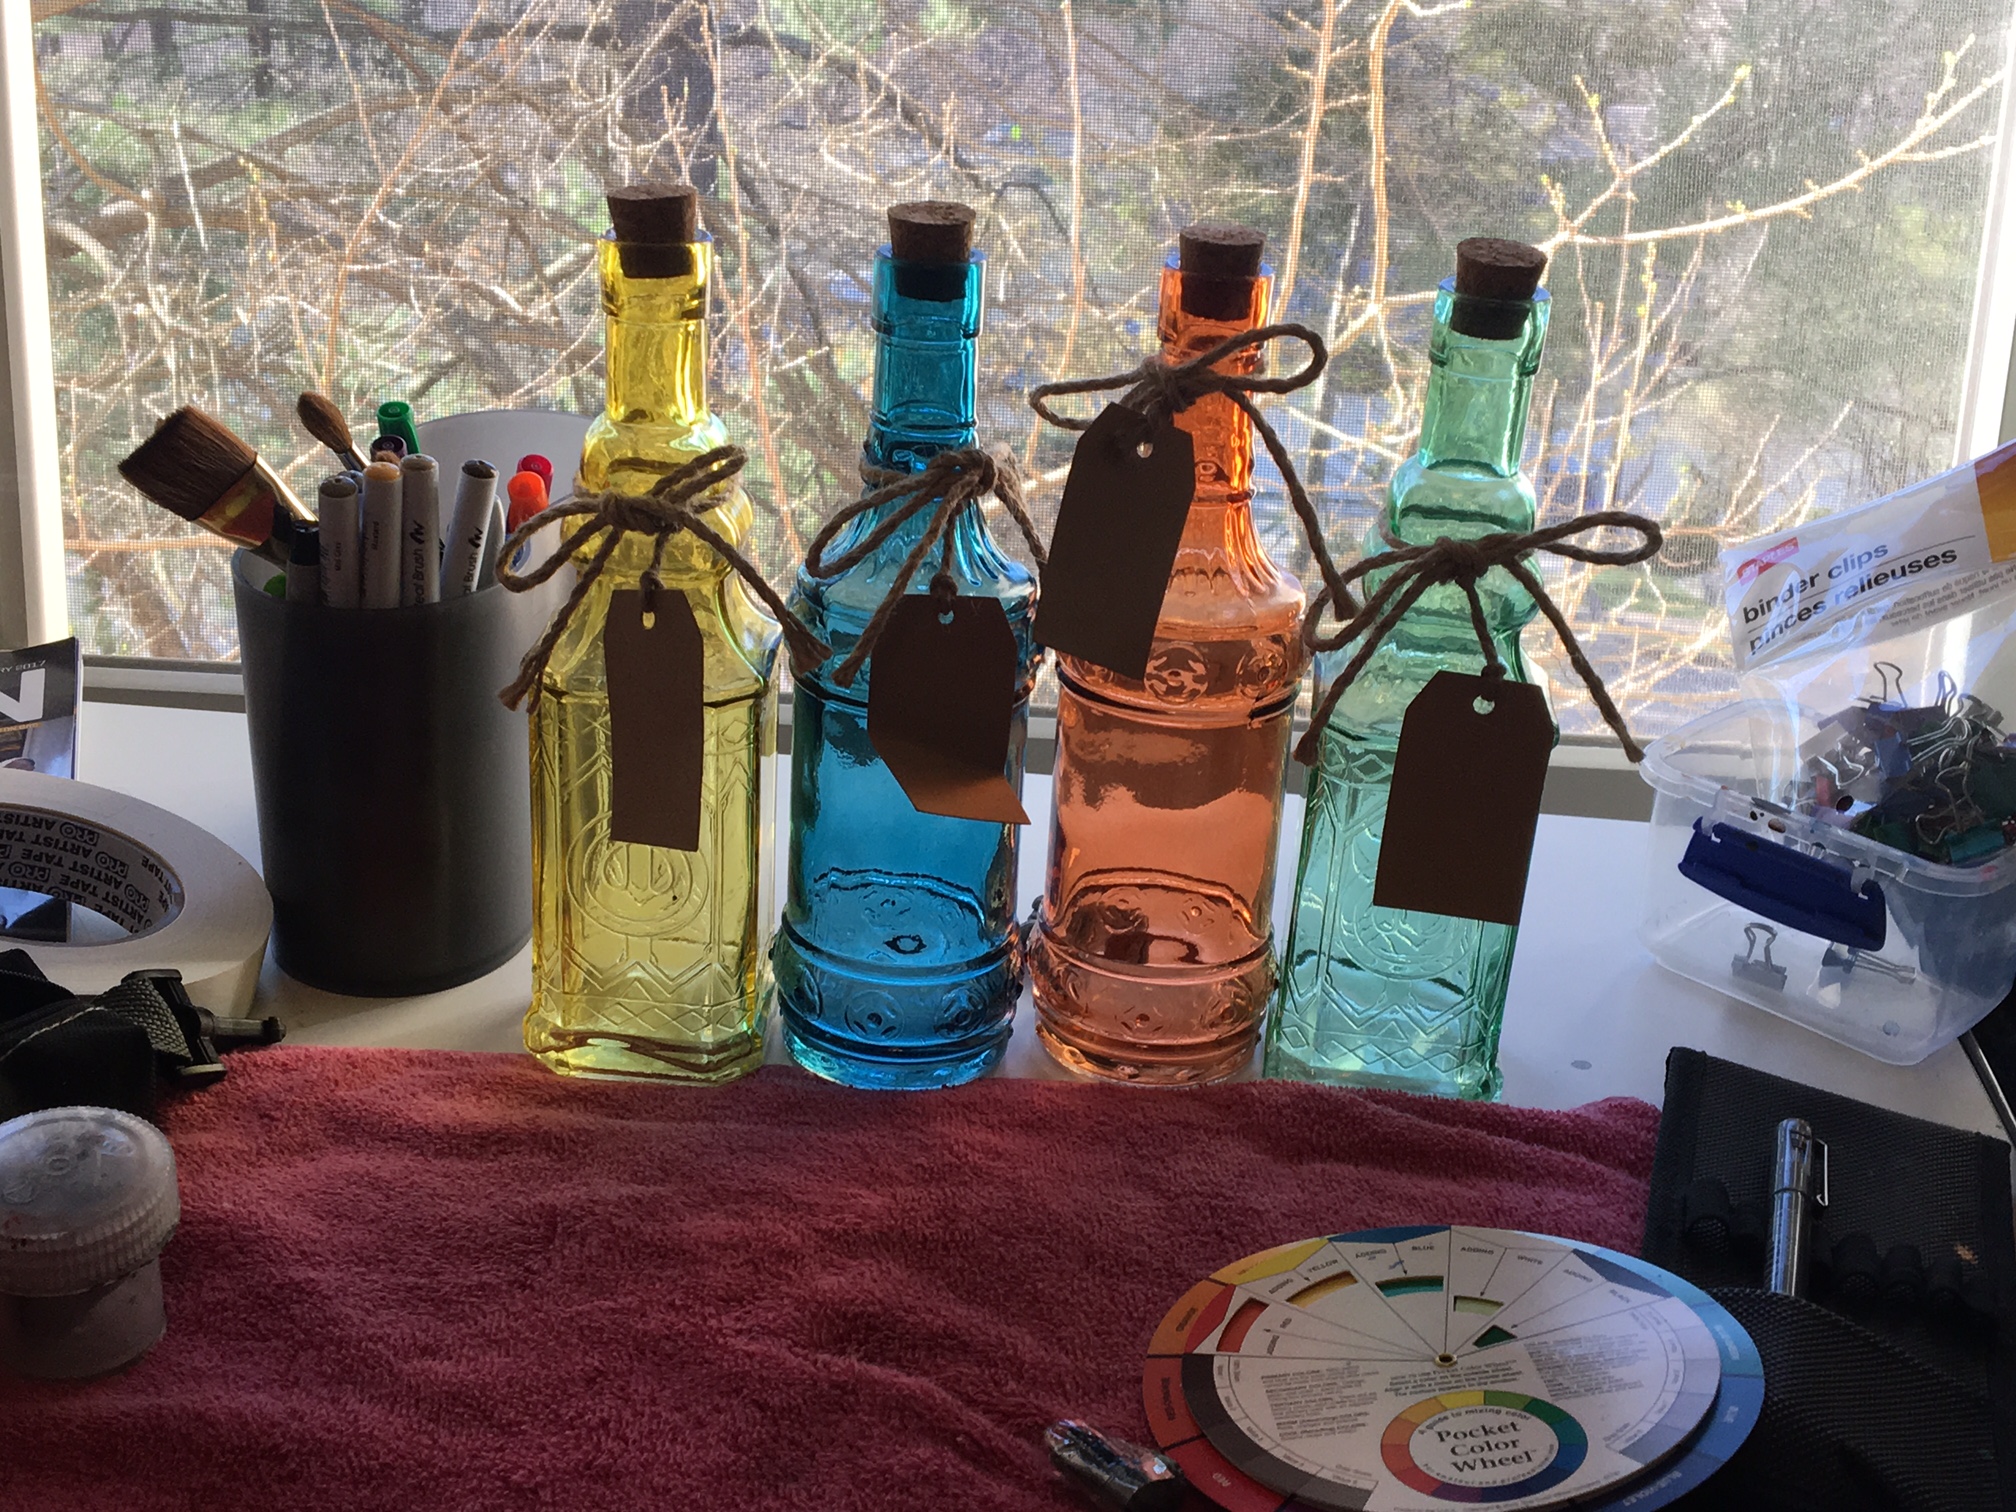 Colored bottles in a window photo